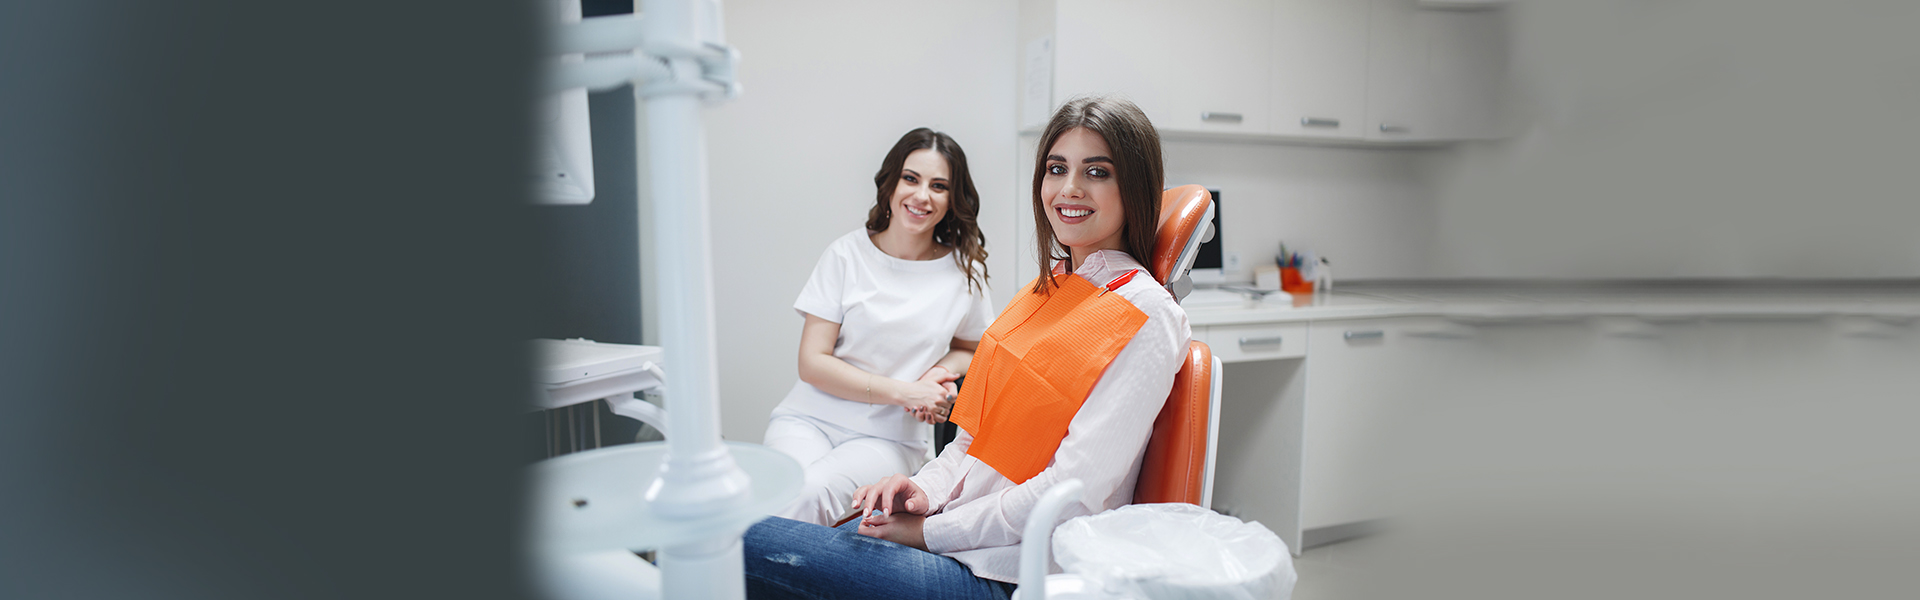 Root Canal Treatment in Wenatchee, WA